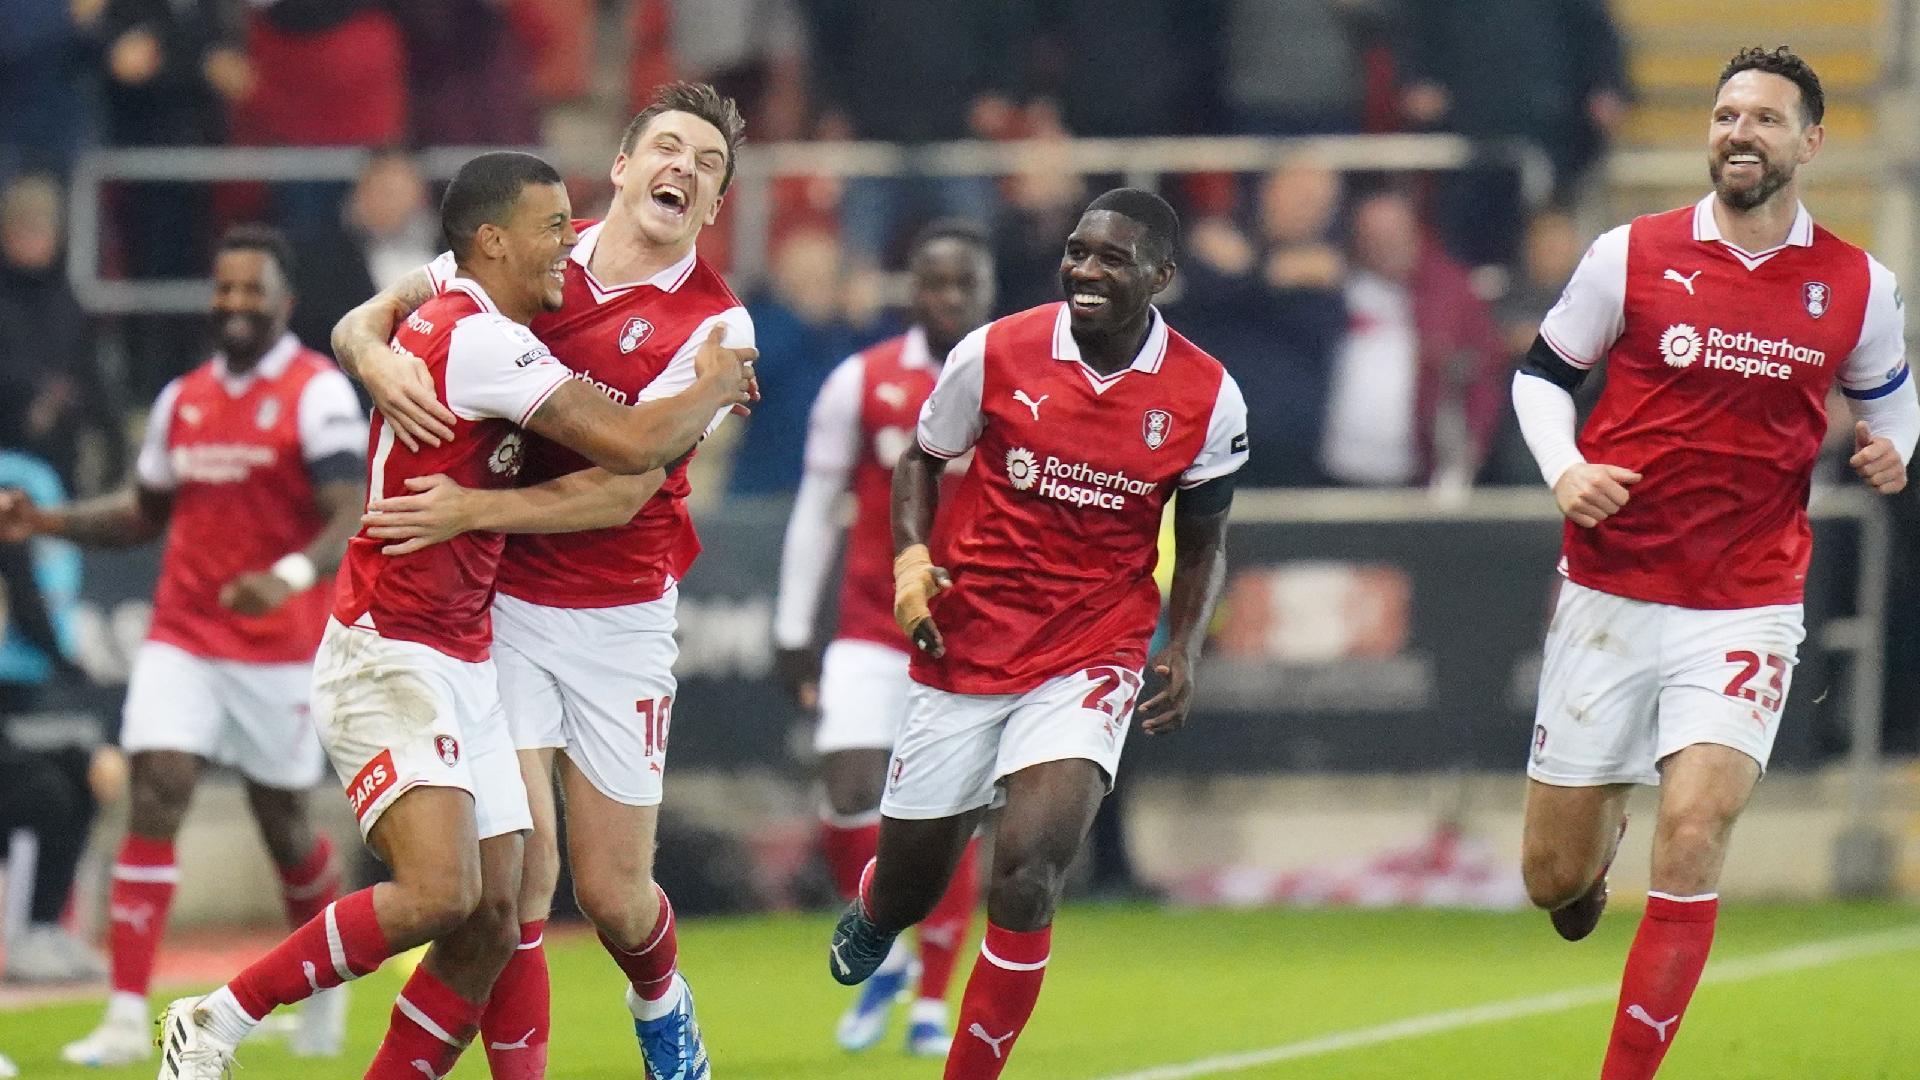 Rotherham record second success of the season by beating Coventry